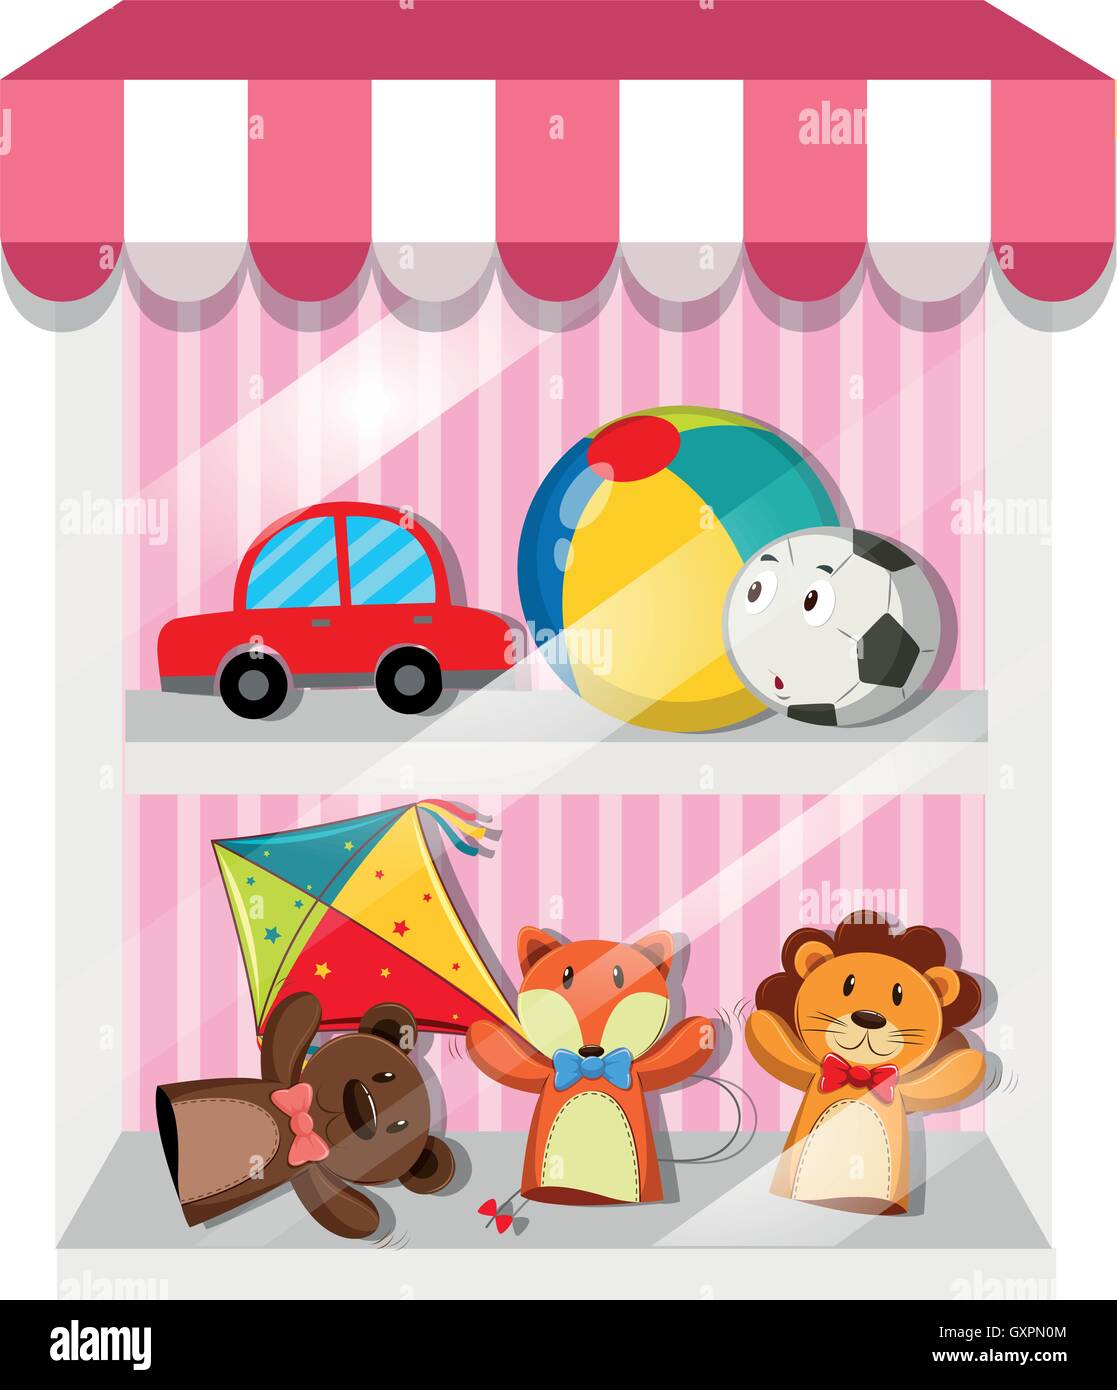 Set of puppets and toys illustration Stock Vector